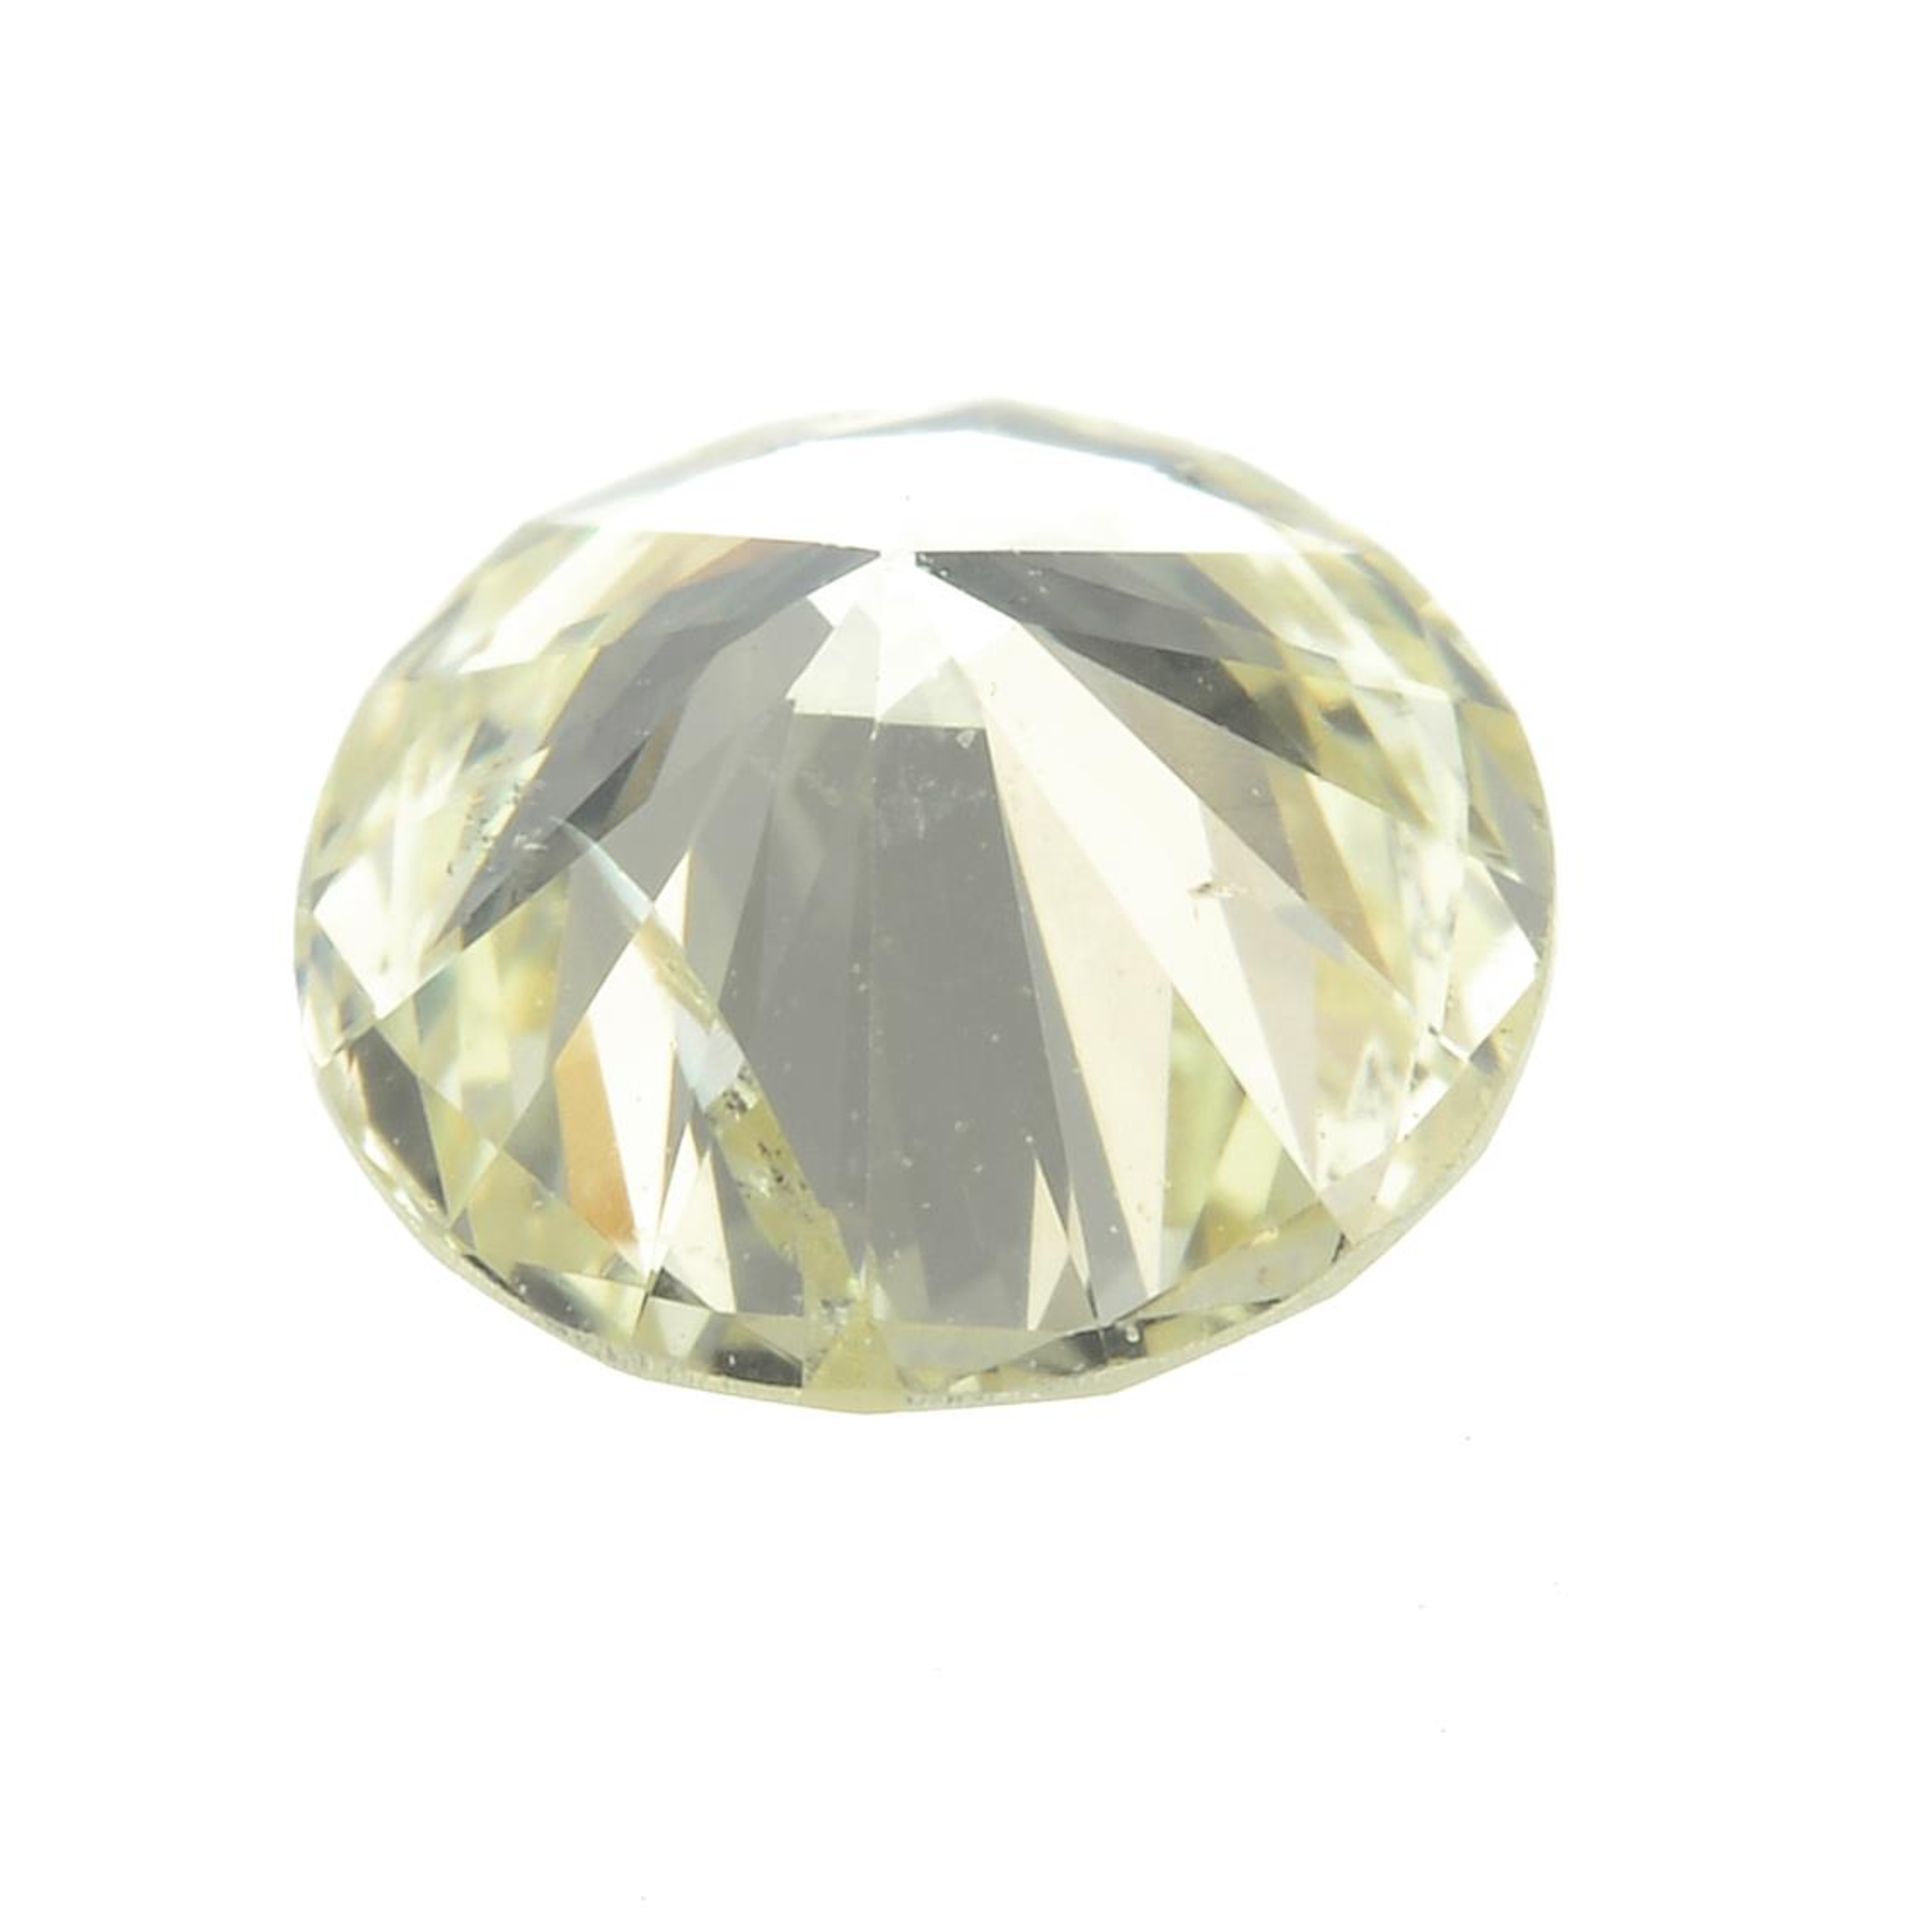 A brilliant-cut diamond, weighing 0.52ct. - Image 2 of 2